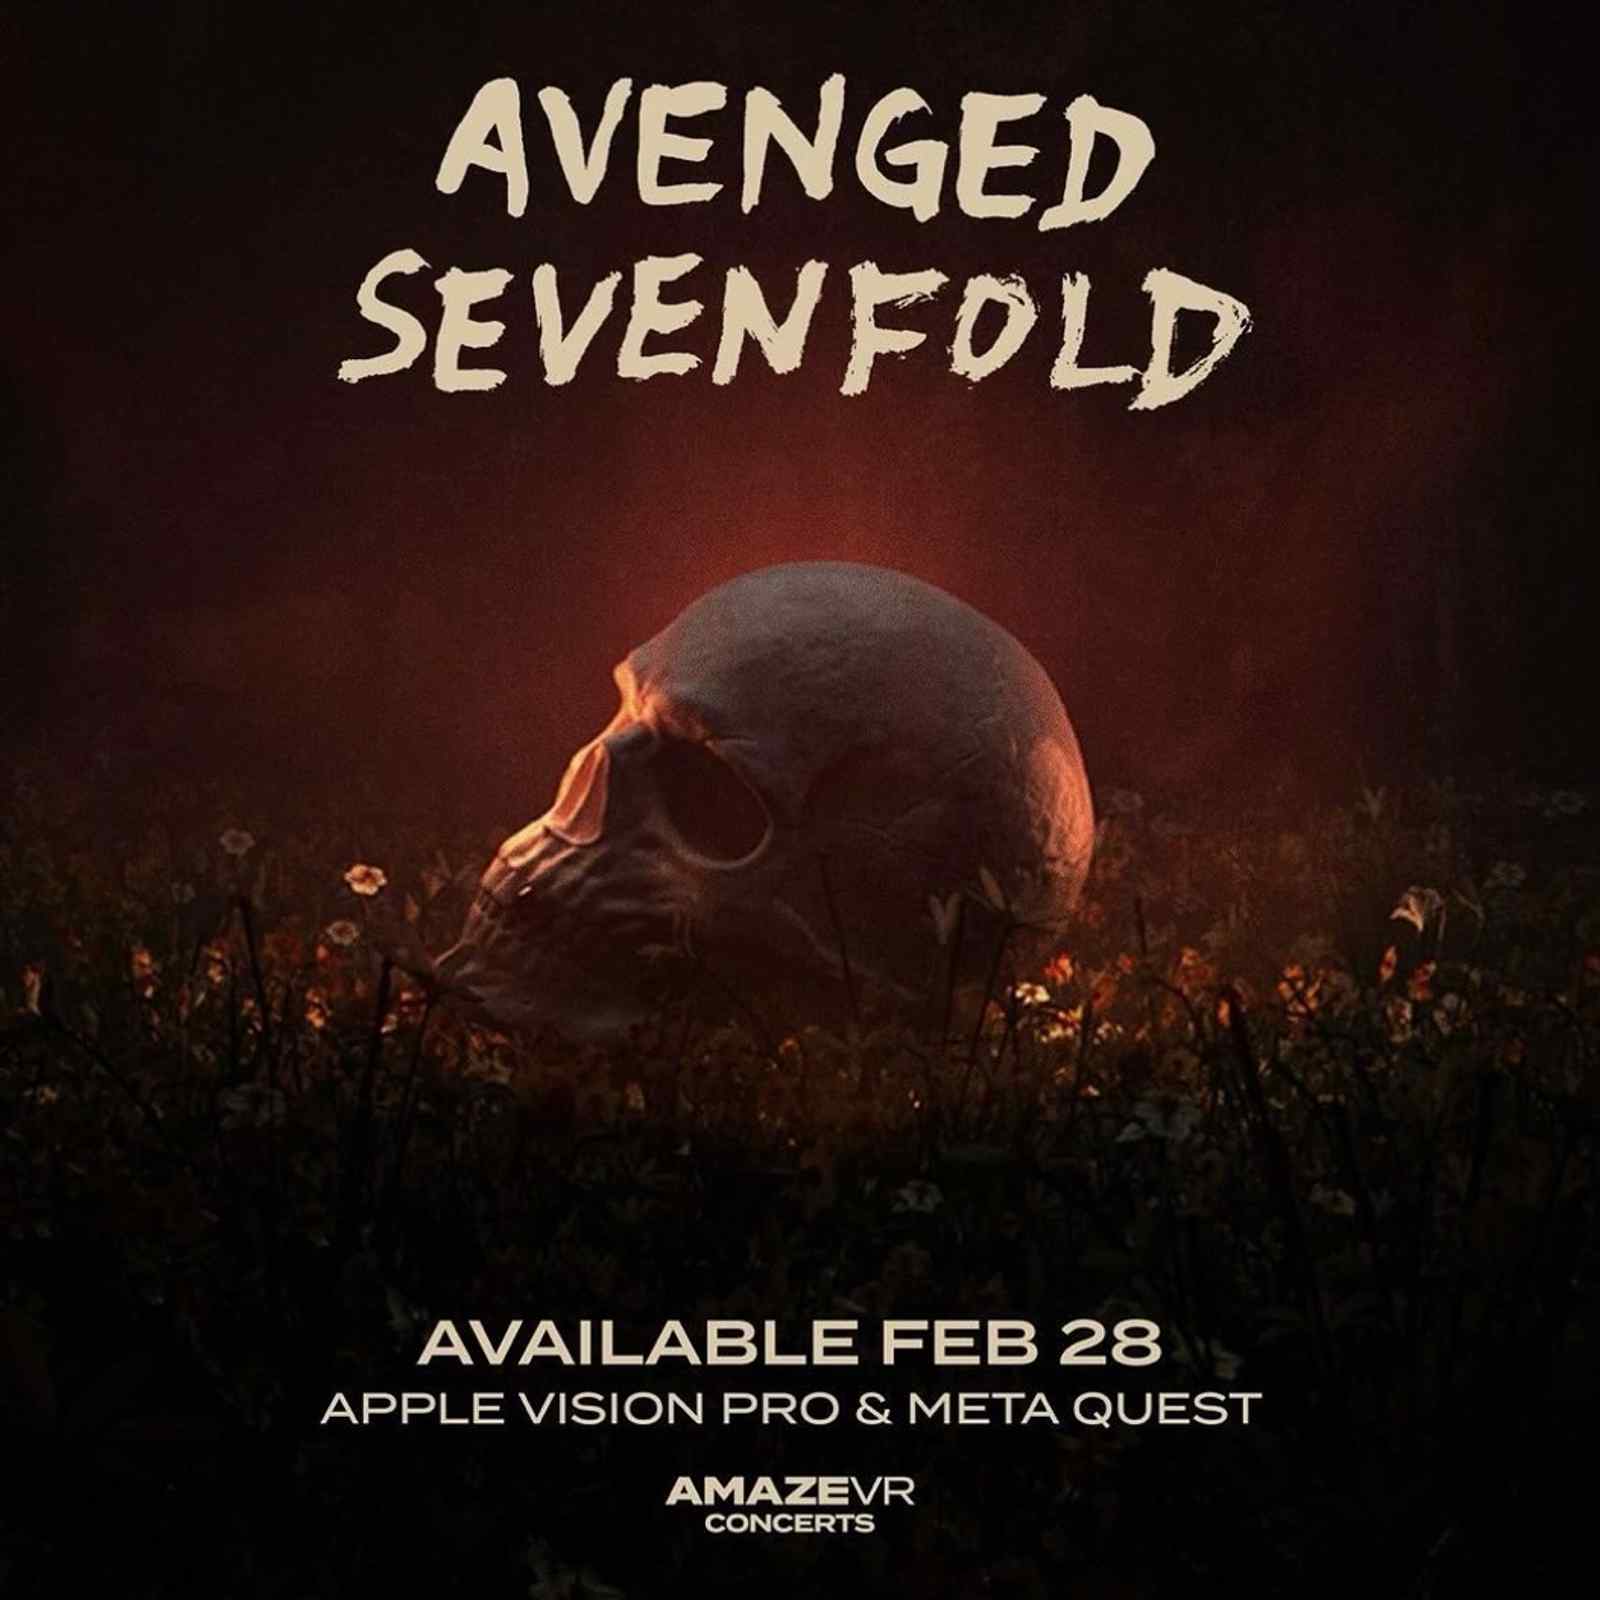 Immersive, Interactive VR Concert Coming Feb 28th.